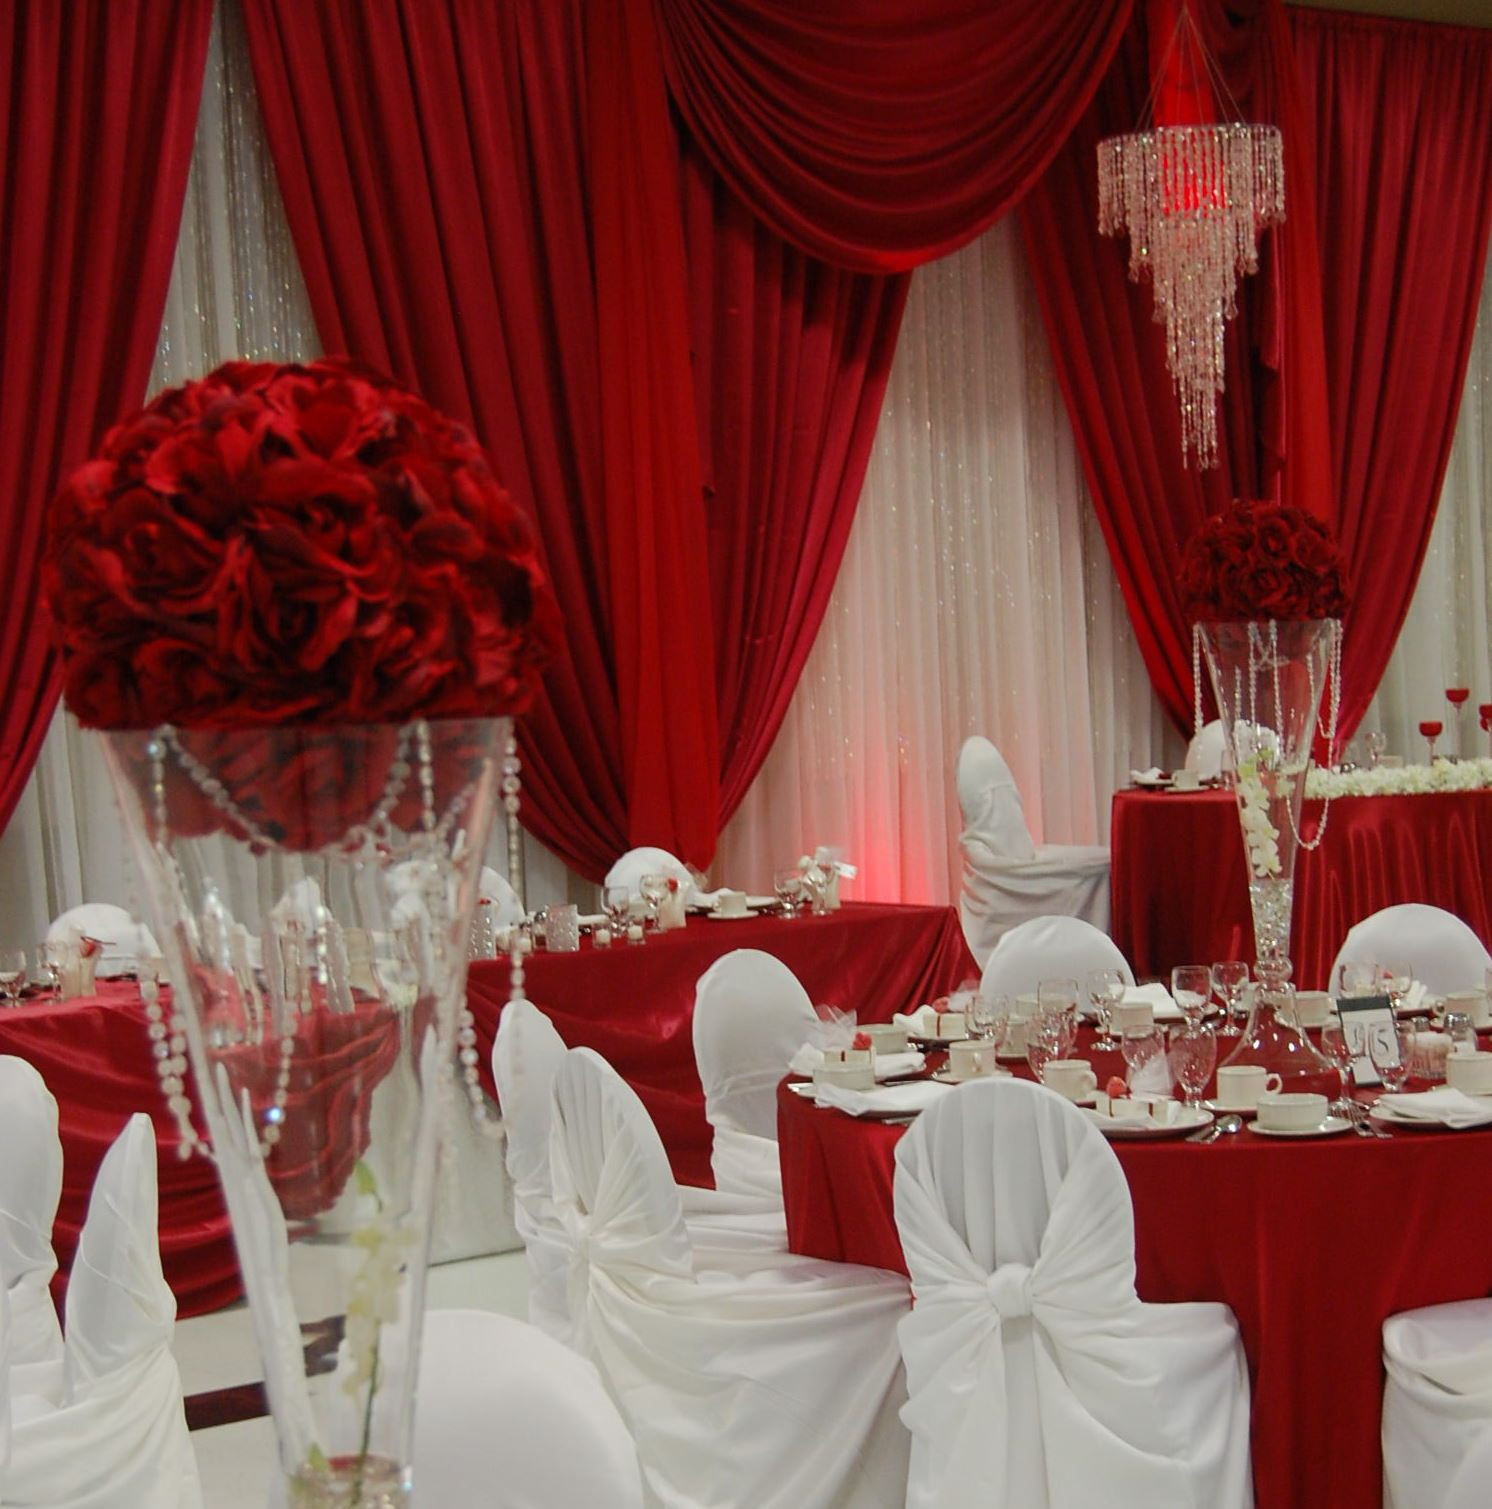 Wedding Decorations Red And White
 oh my never been a fan of red and white weddings but this